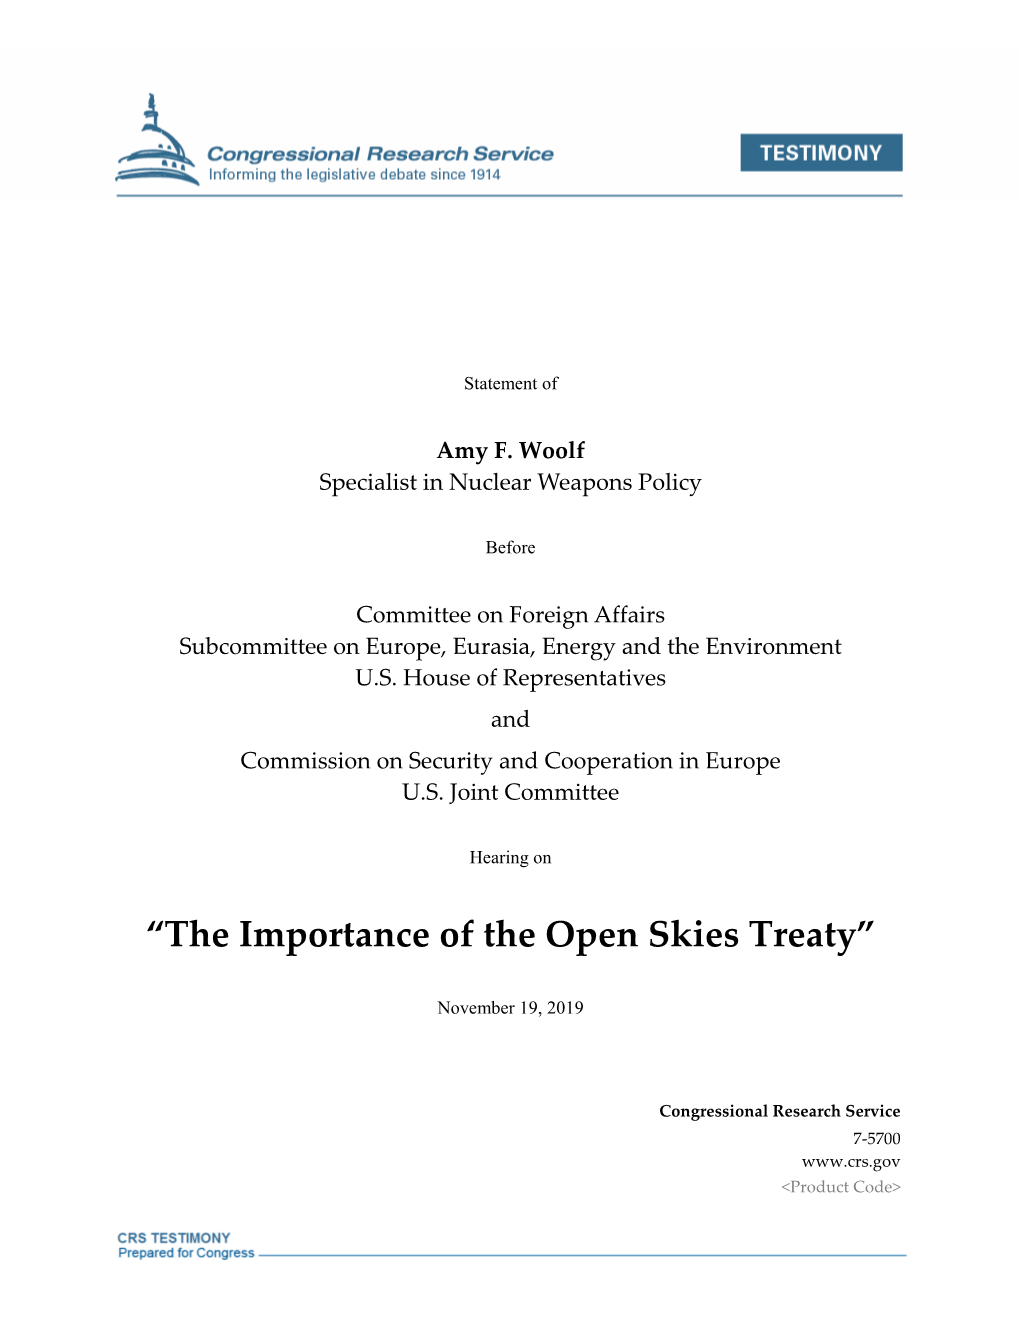 The Importance of the Open Skies Treaty”